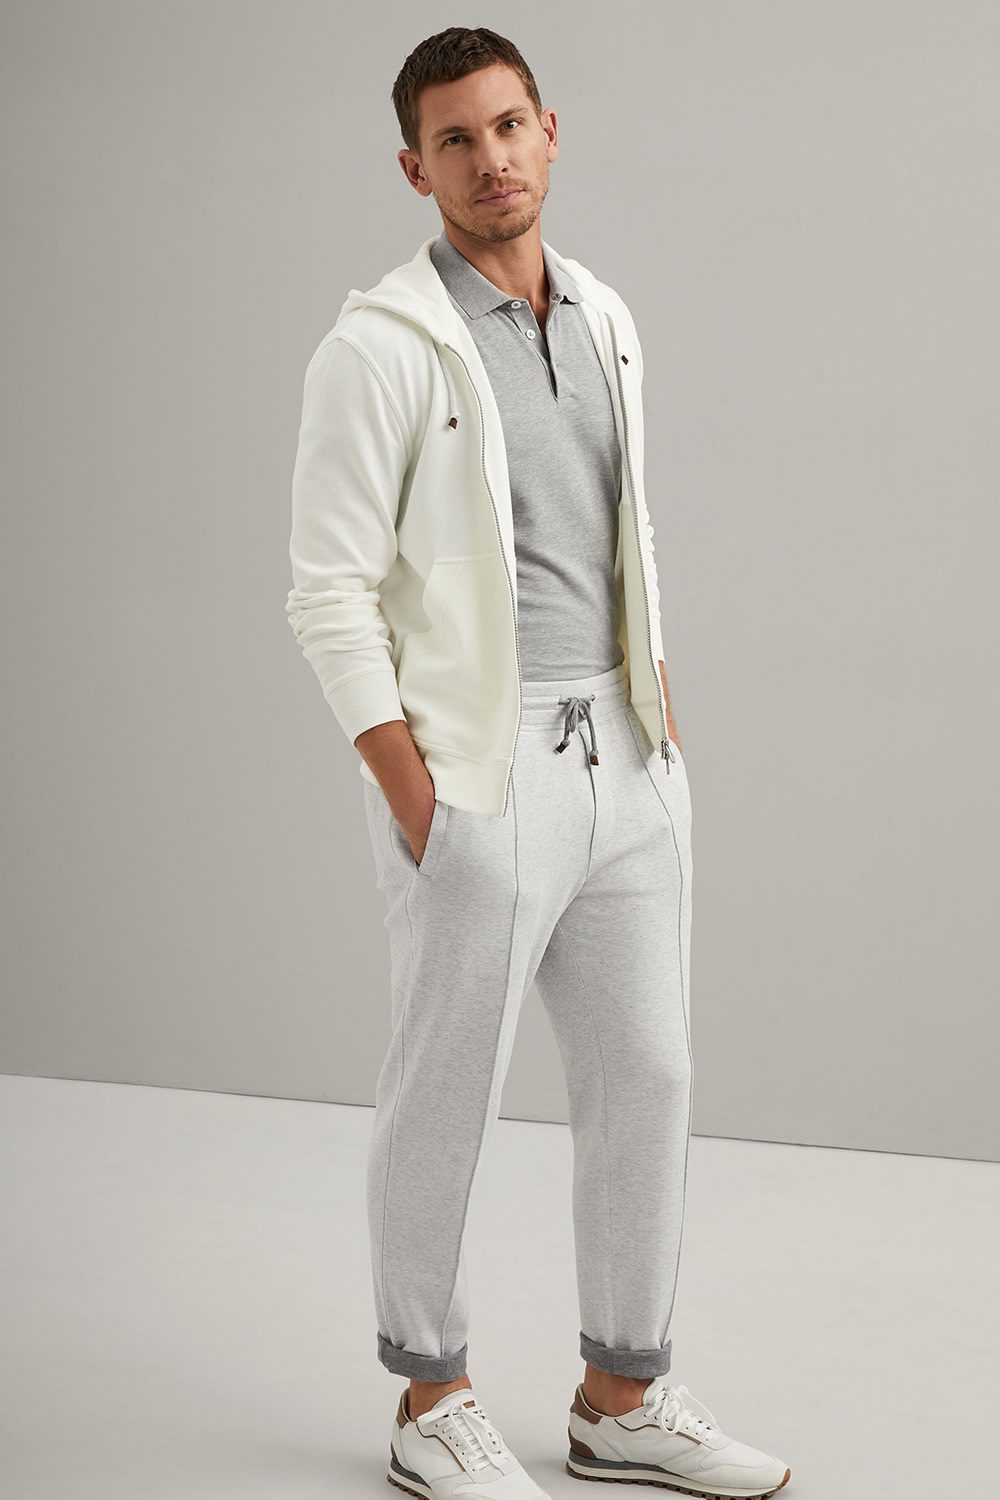 7 Sweatpants Outfits That Look Stylish, Not Sloppy